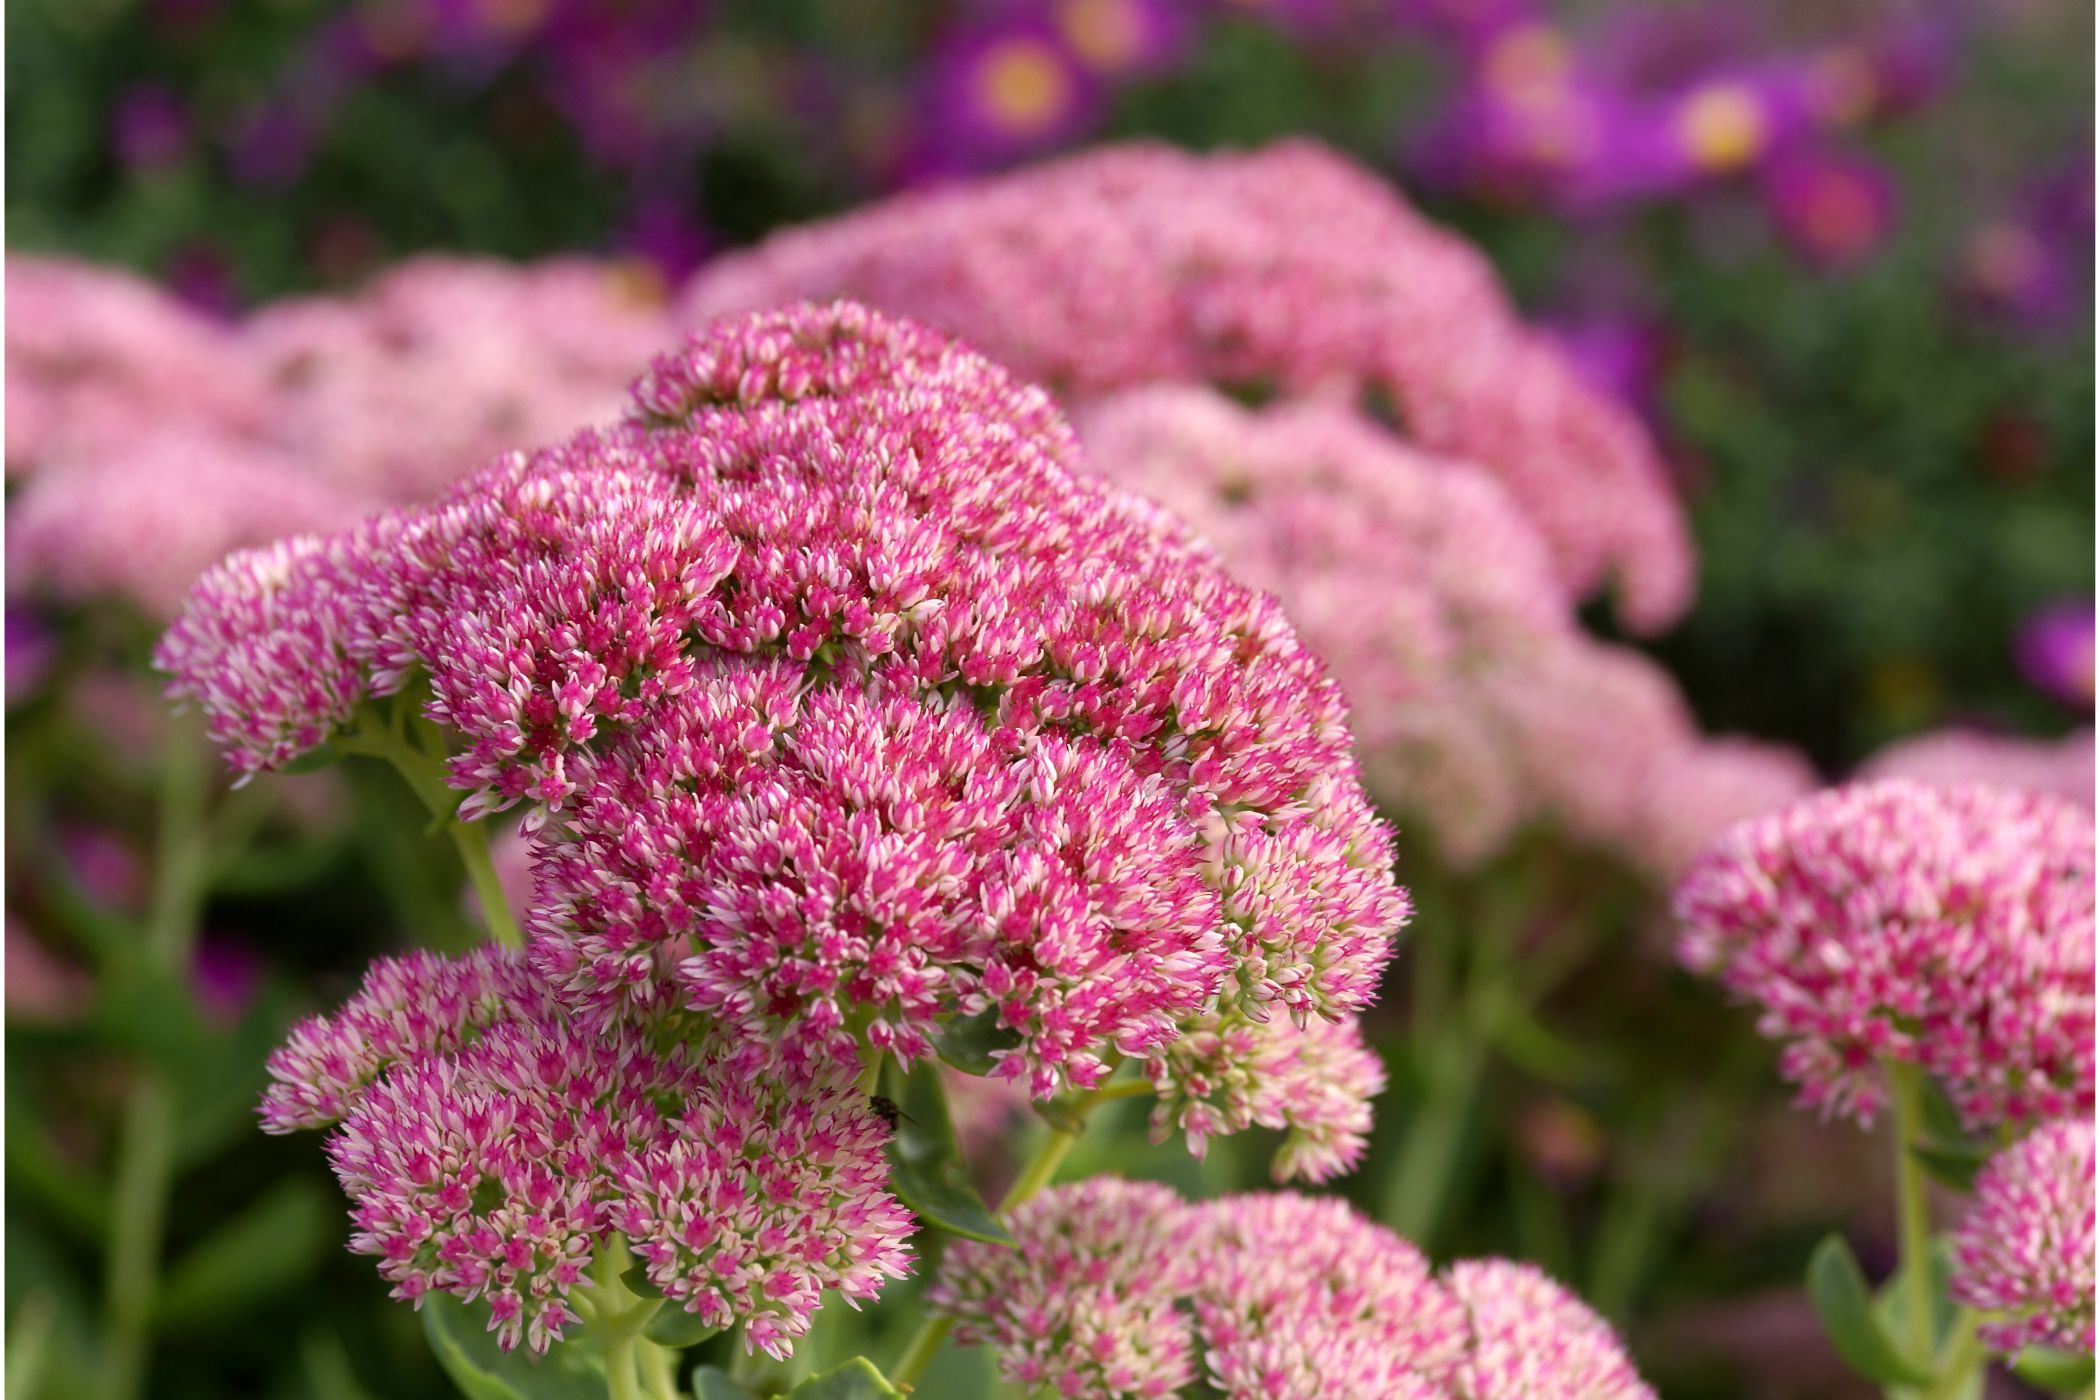 12 Fall Flowering Perennials to Brightening Up The Backyard For Those Chilly Days In The Fall